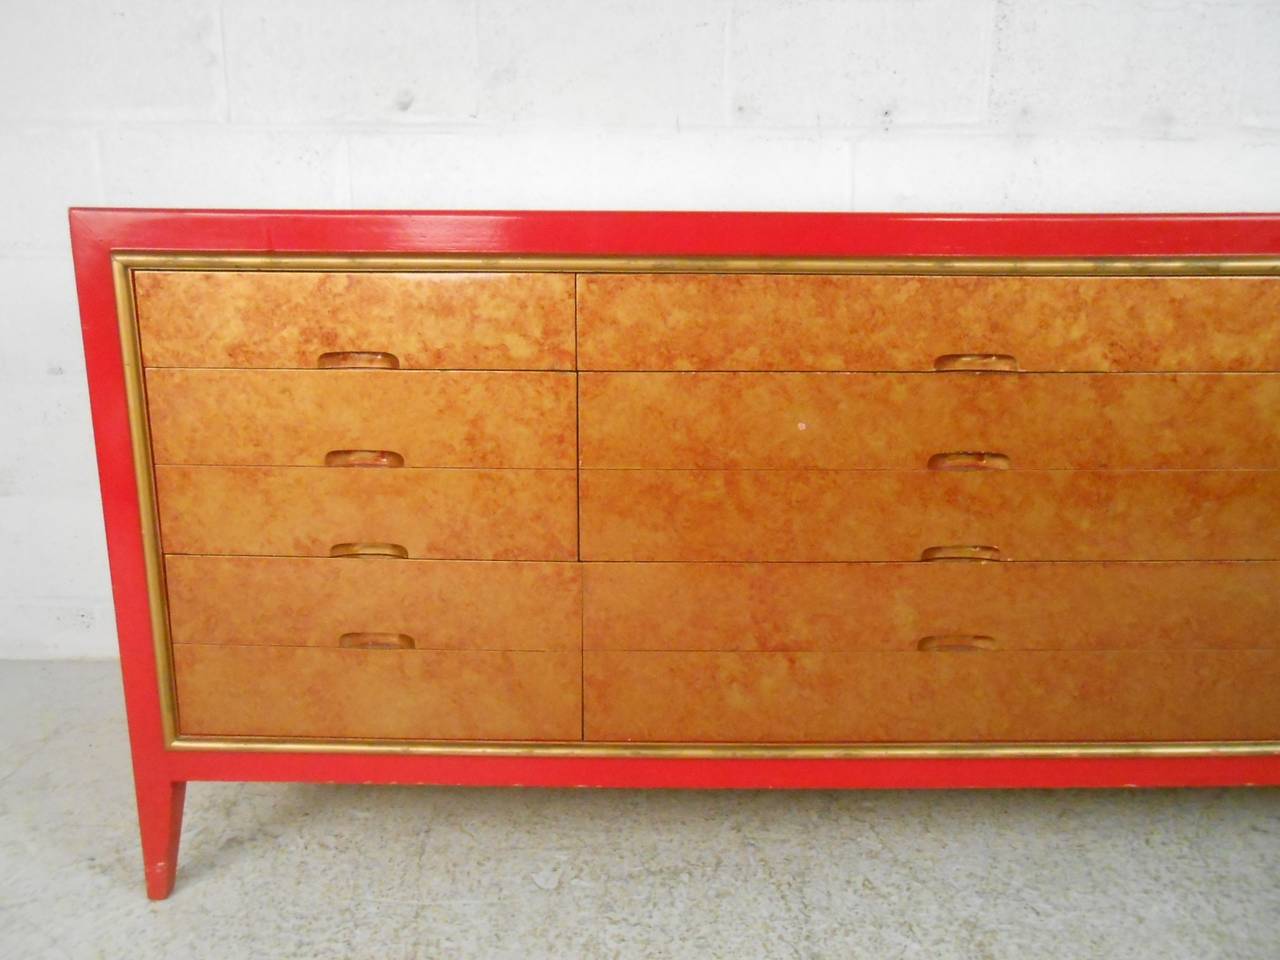 Late 20th Century Mid-Century Modern Red and Gold Dresser